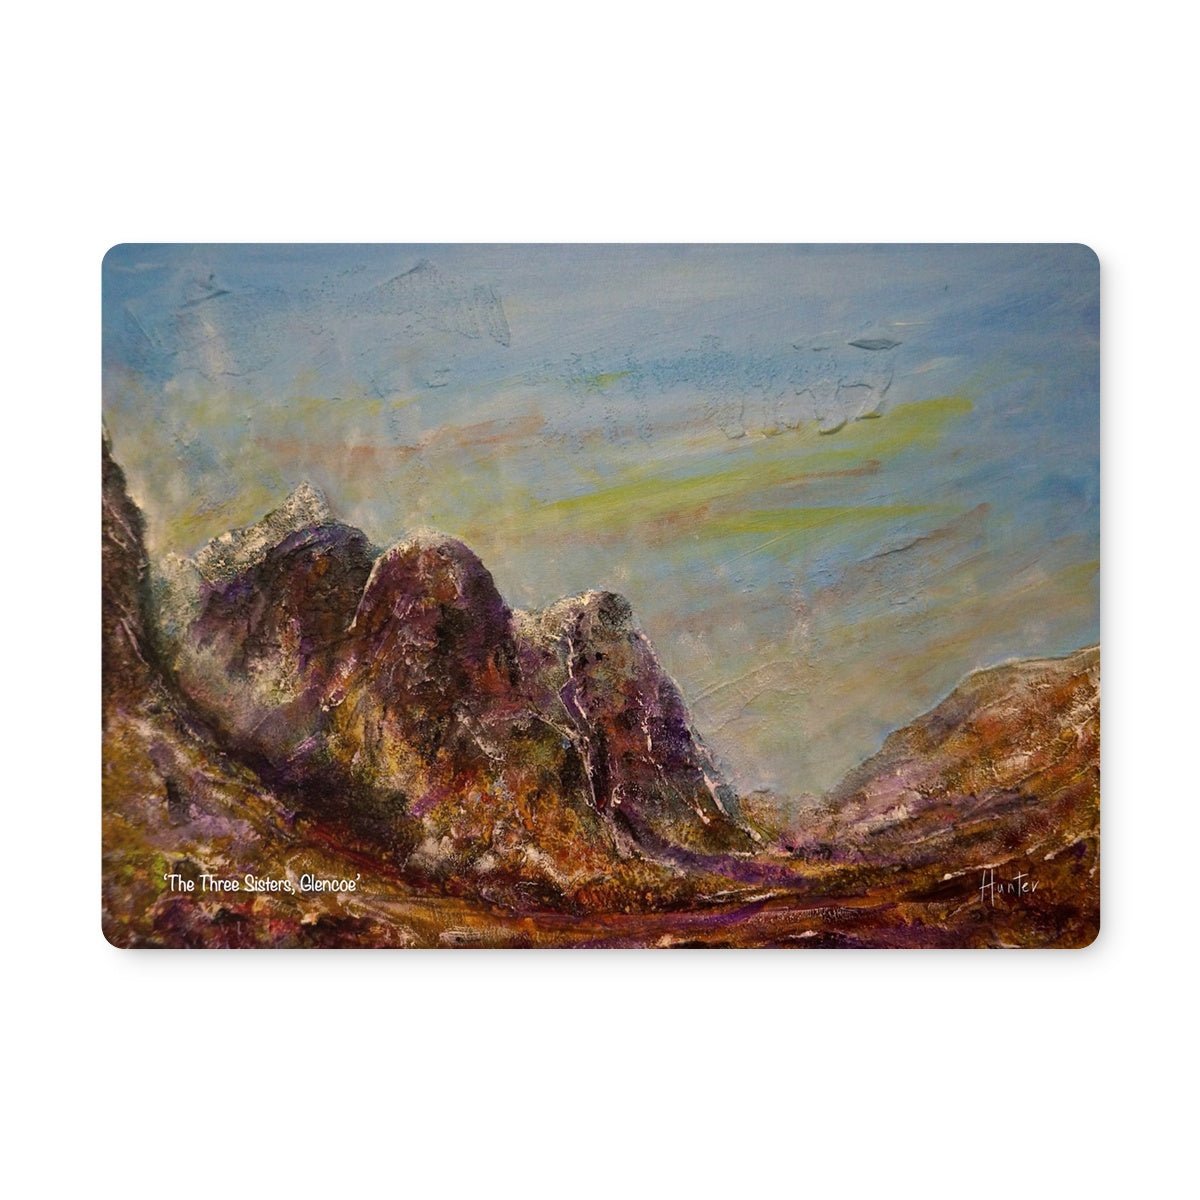 Three Sisters Glencoe Art Gifts Placemat-Placemats-Glencoe Art Gallery-Single Placemat-Paintings, Prints, Homeware, Art Gifts From Scotland By Scottish Artist Kevin Hunter